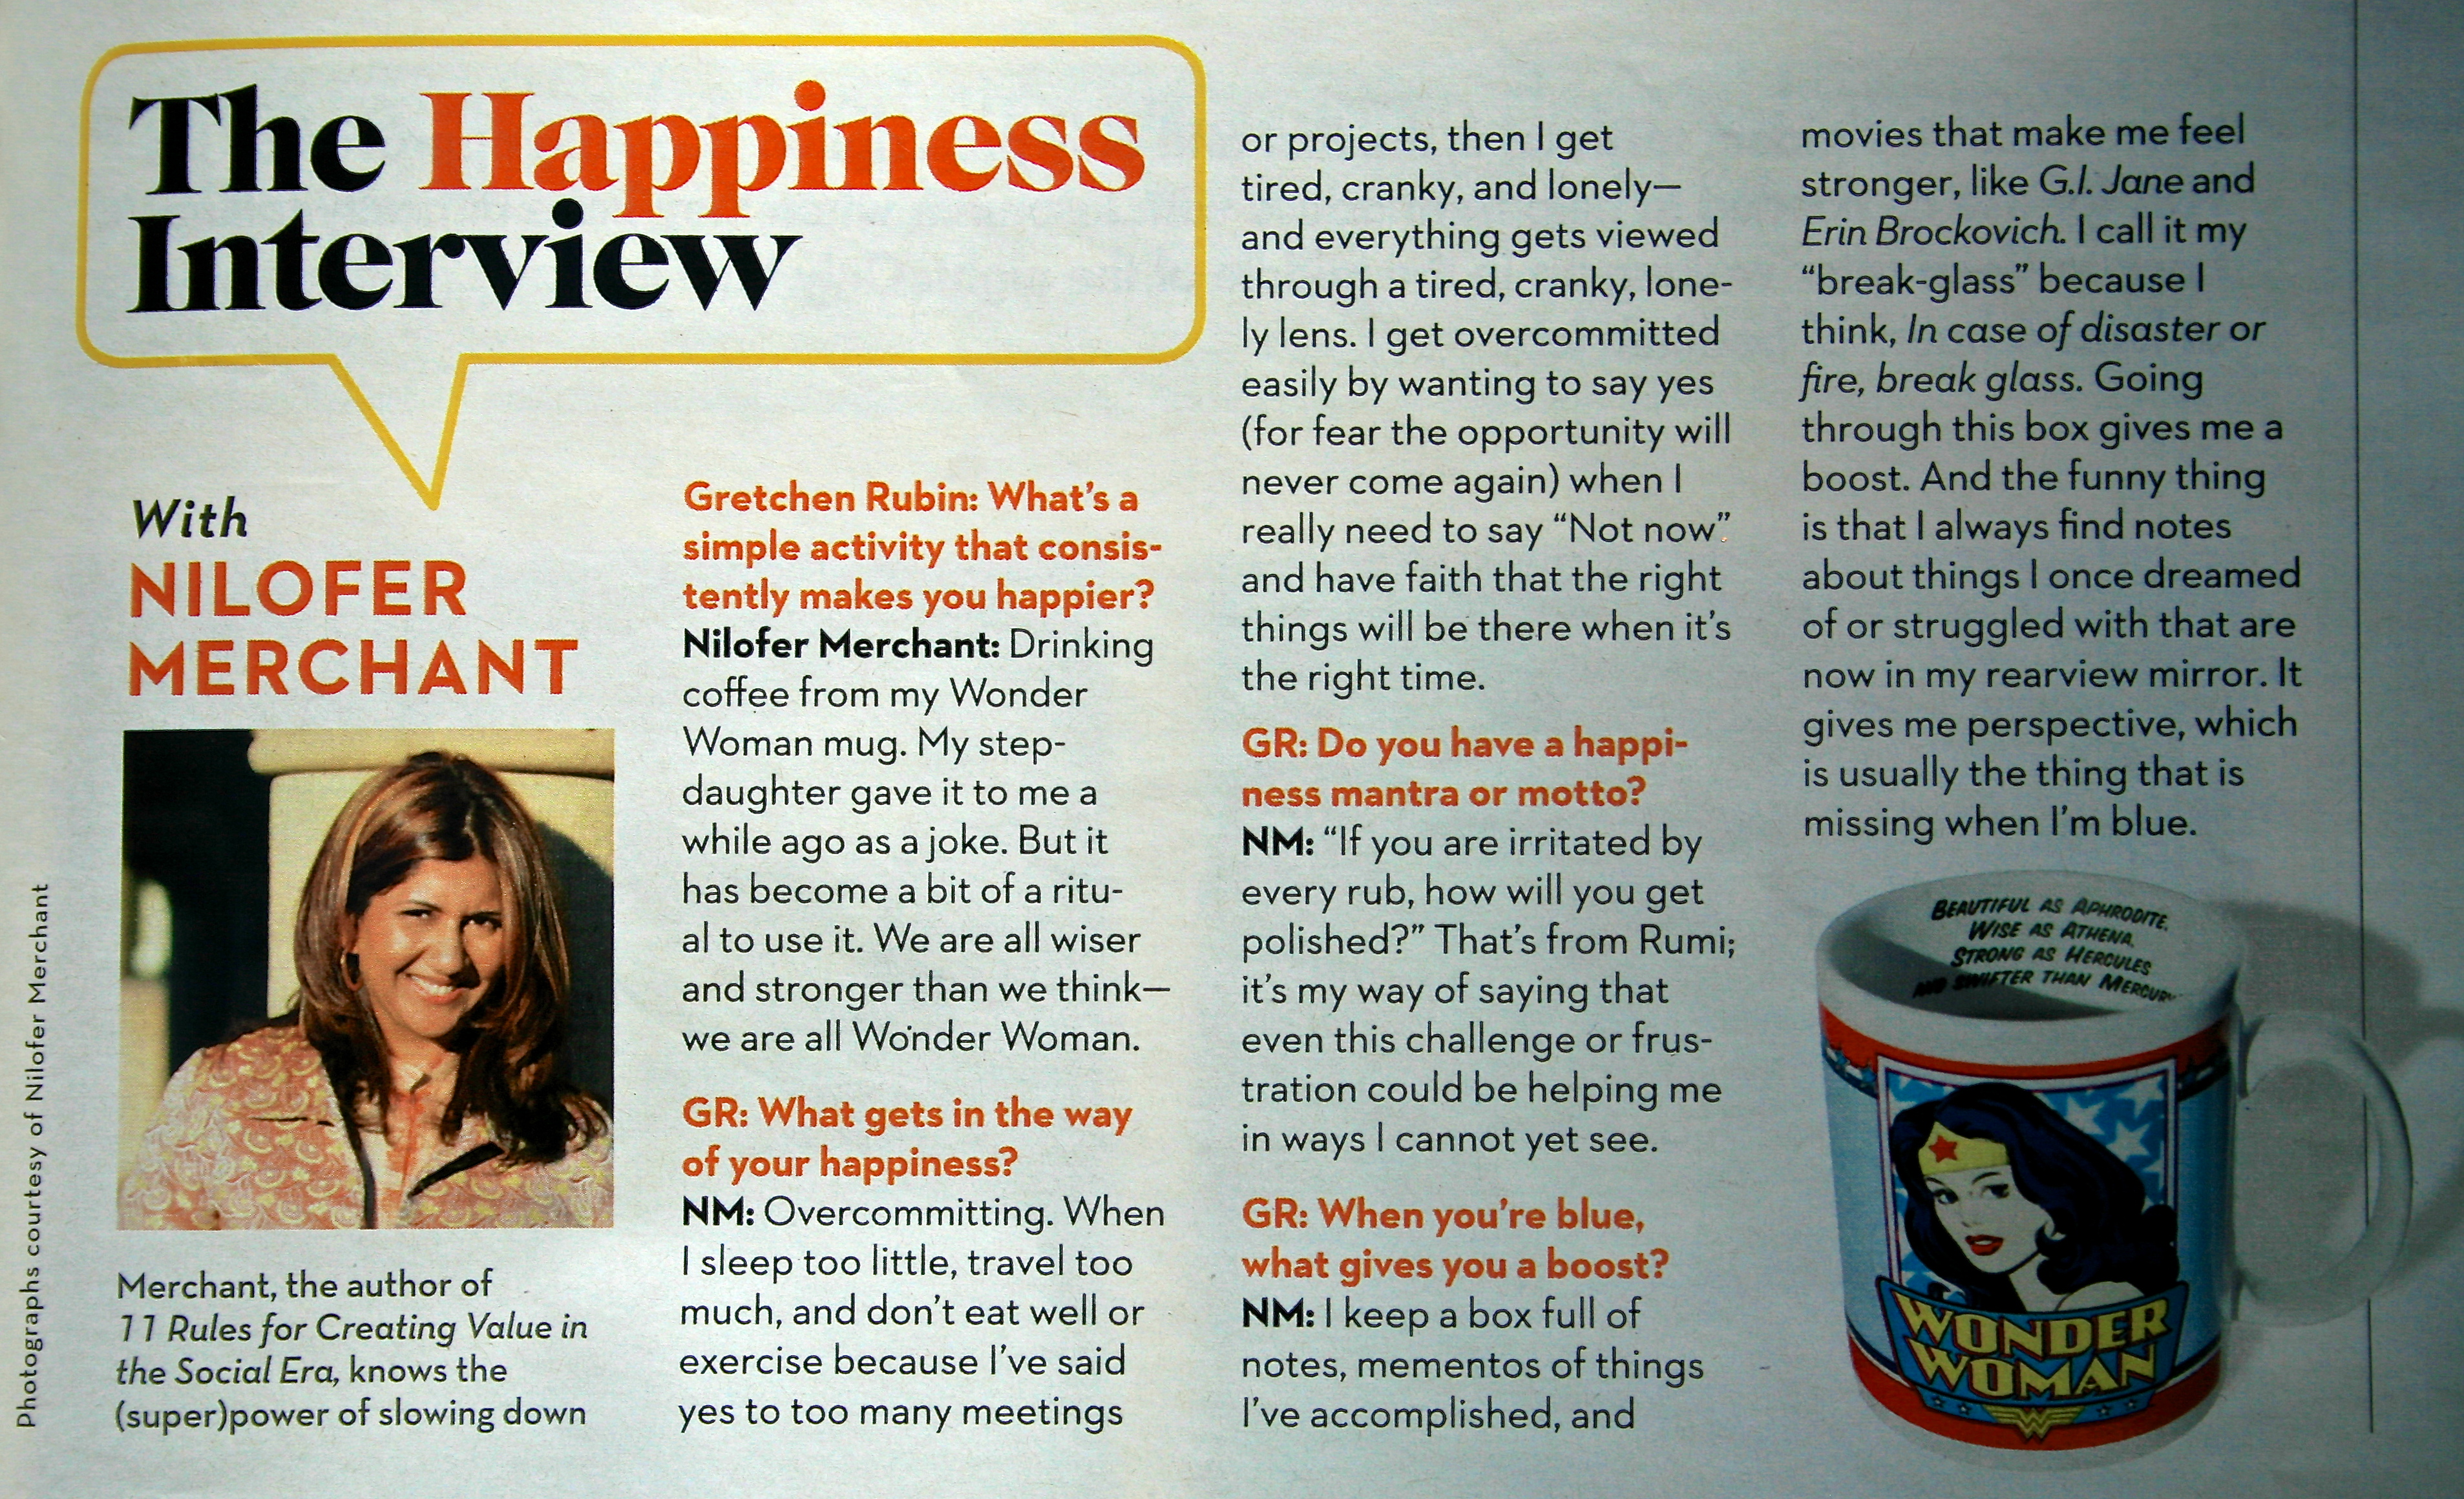 The Happiness Interview with Nilofer Merchant in Good Housekeping  January 2013 edition